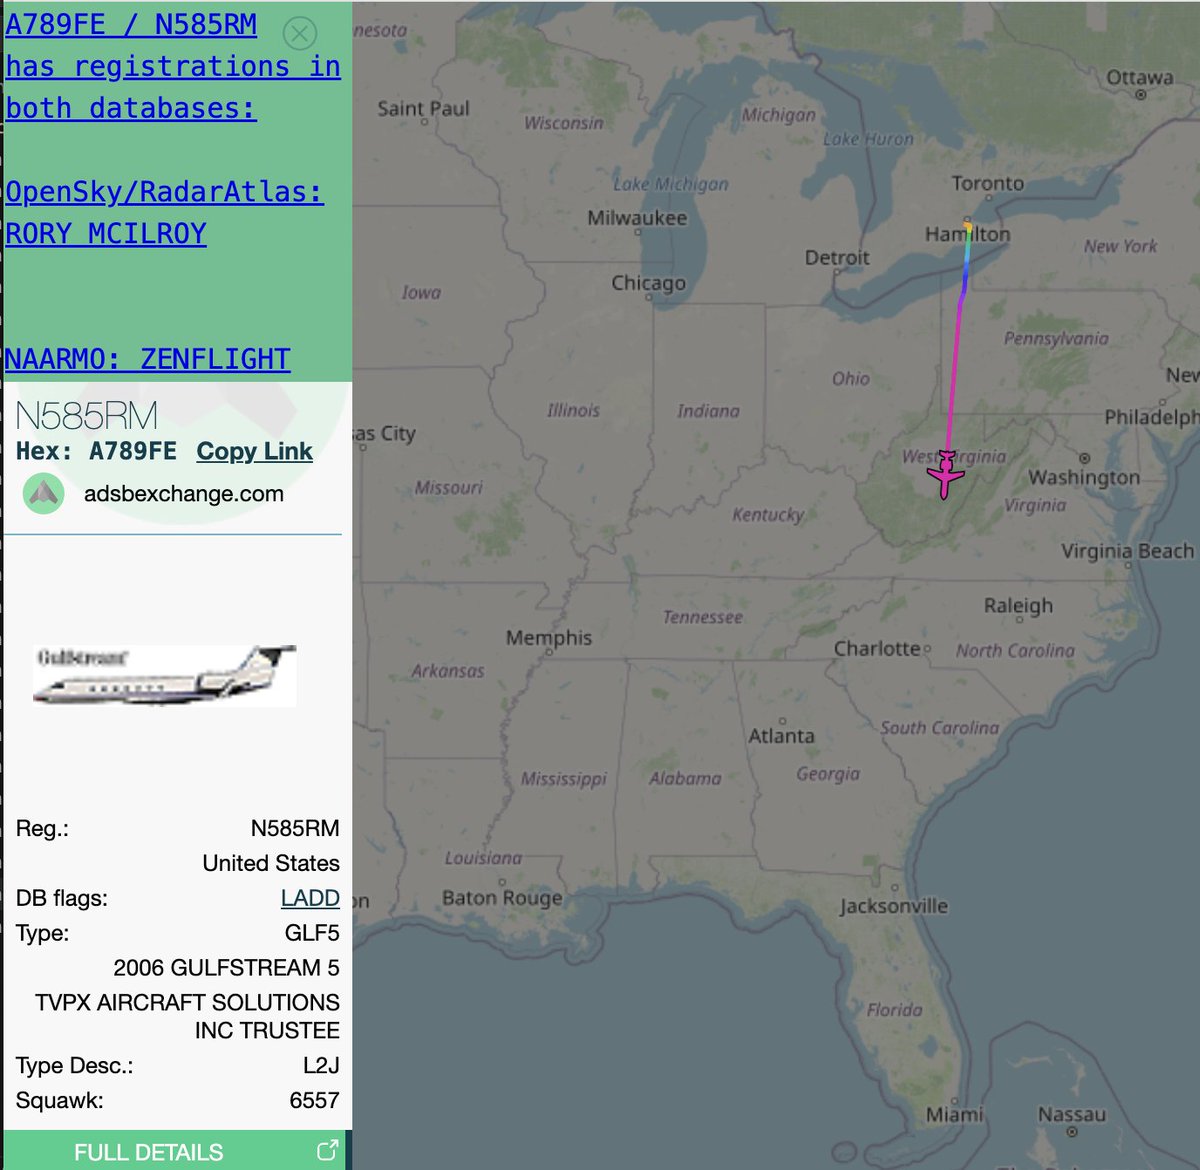 Rory McIlroy's plane #N585RM is headed home to Florida out of Hamilton.